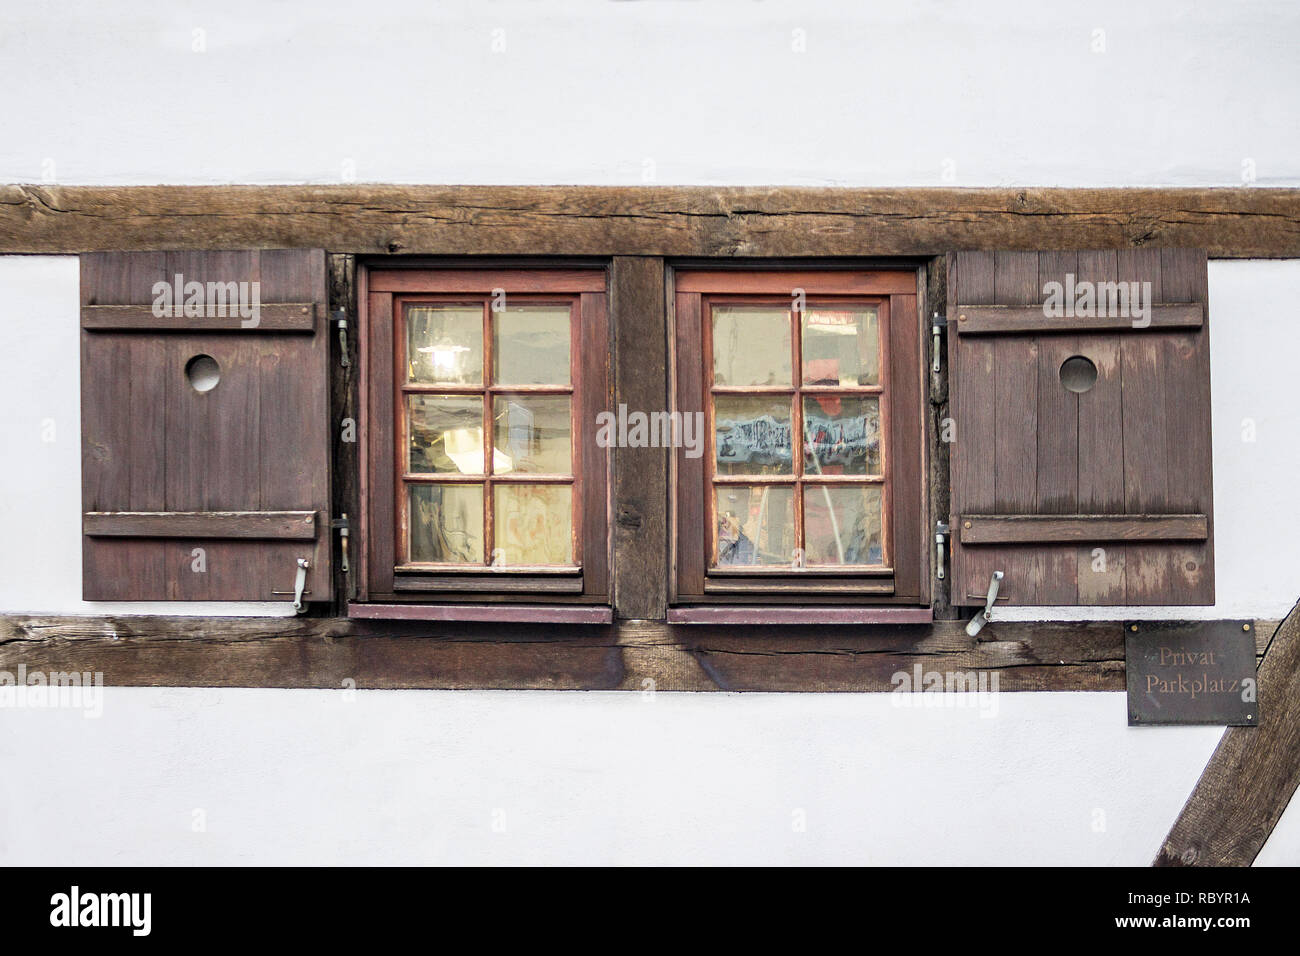 Old ancient wooden window with blinds or shutters. Scenic original and colorful view of antique windows in old city Sindelfingen, Germany. Isolated on Stock Photo